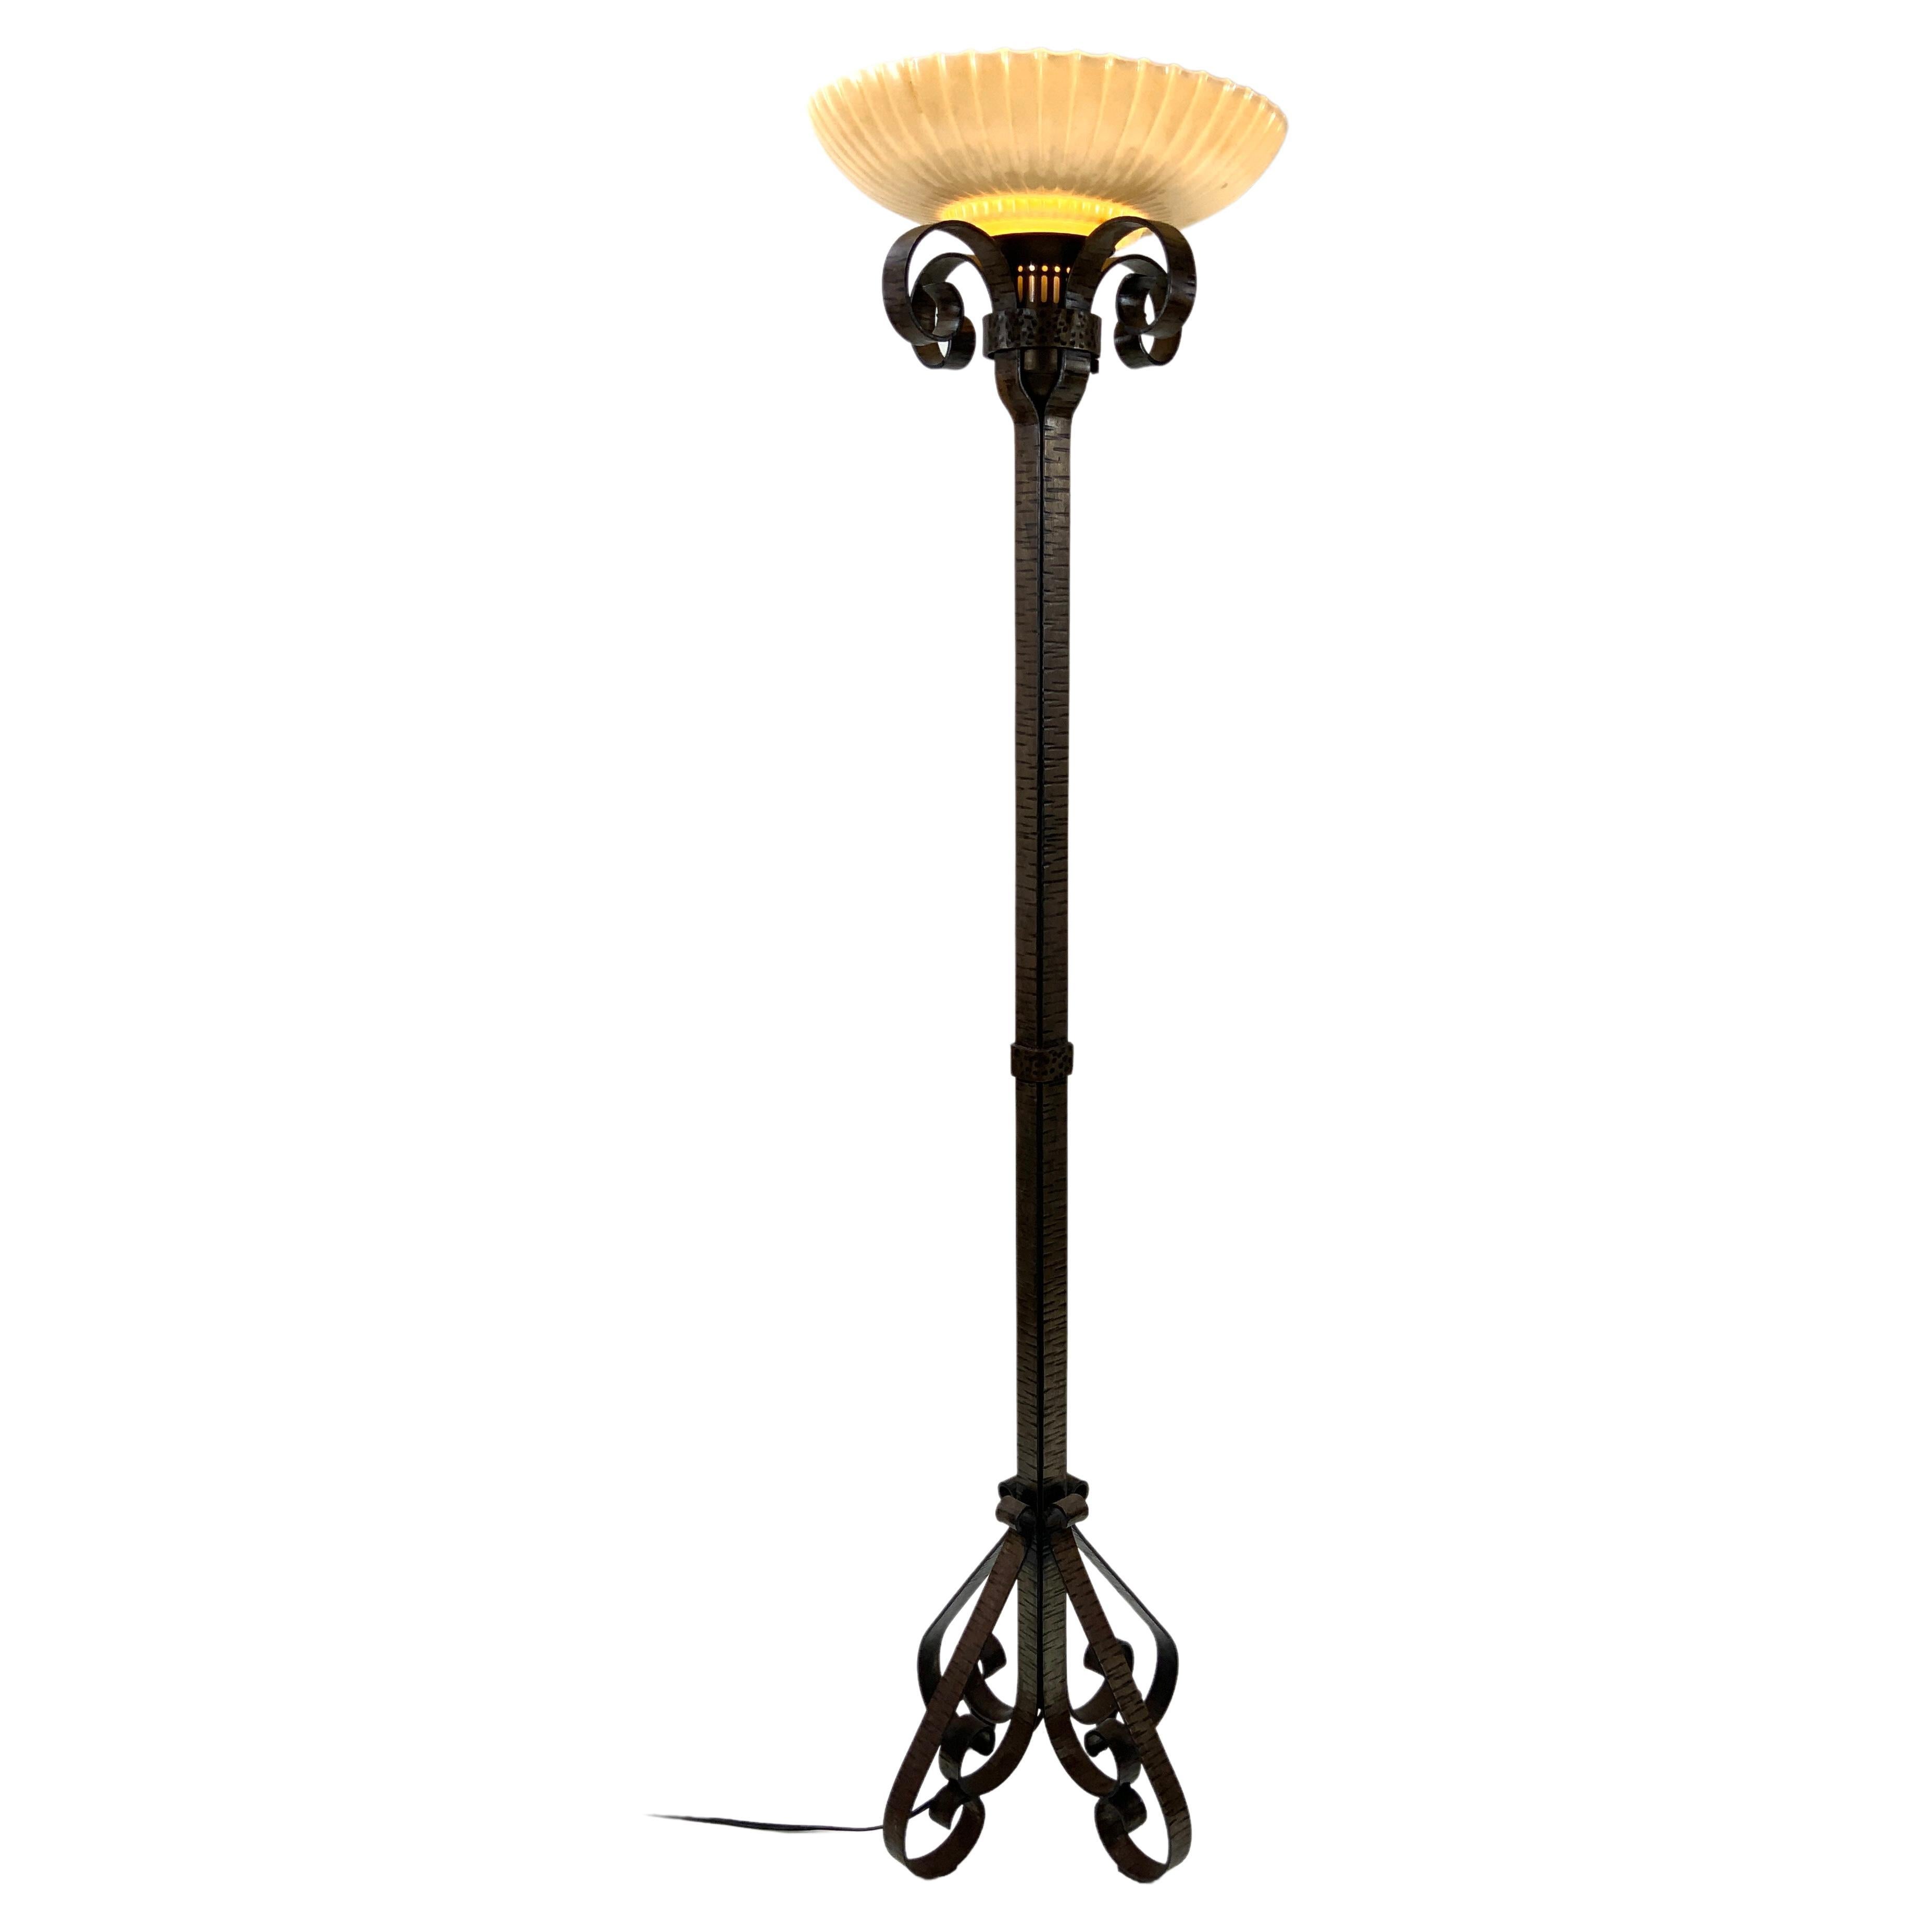 French Art Deco Hand-Hammered Wrought Iron (Fer Forgé Martelé) Floor Lamp, 1930s For Sale